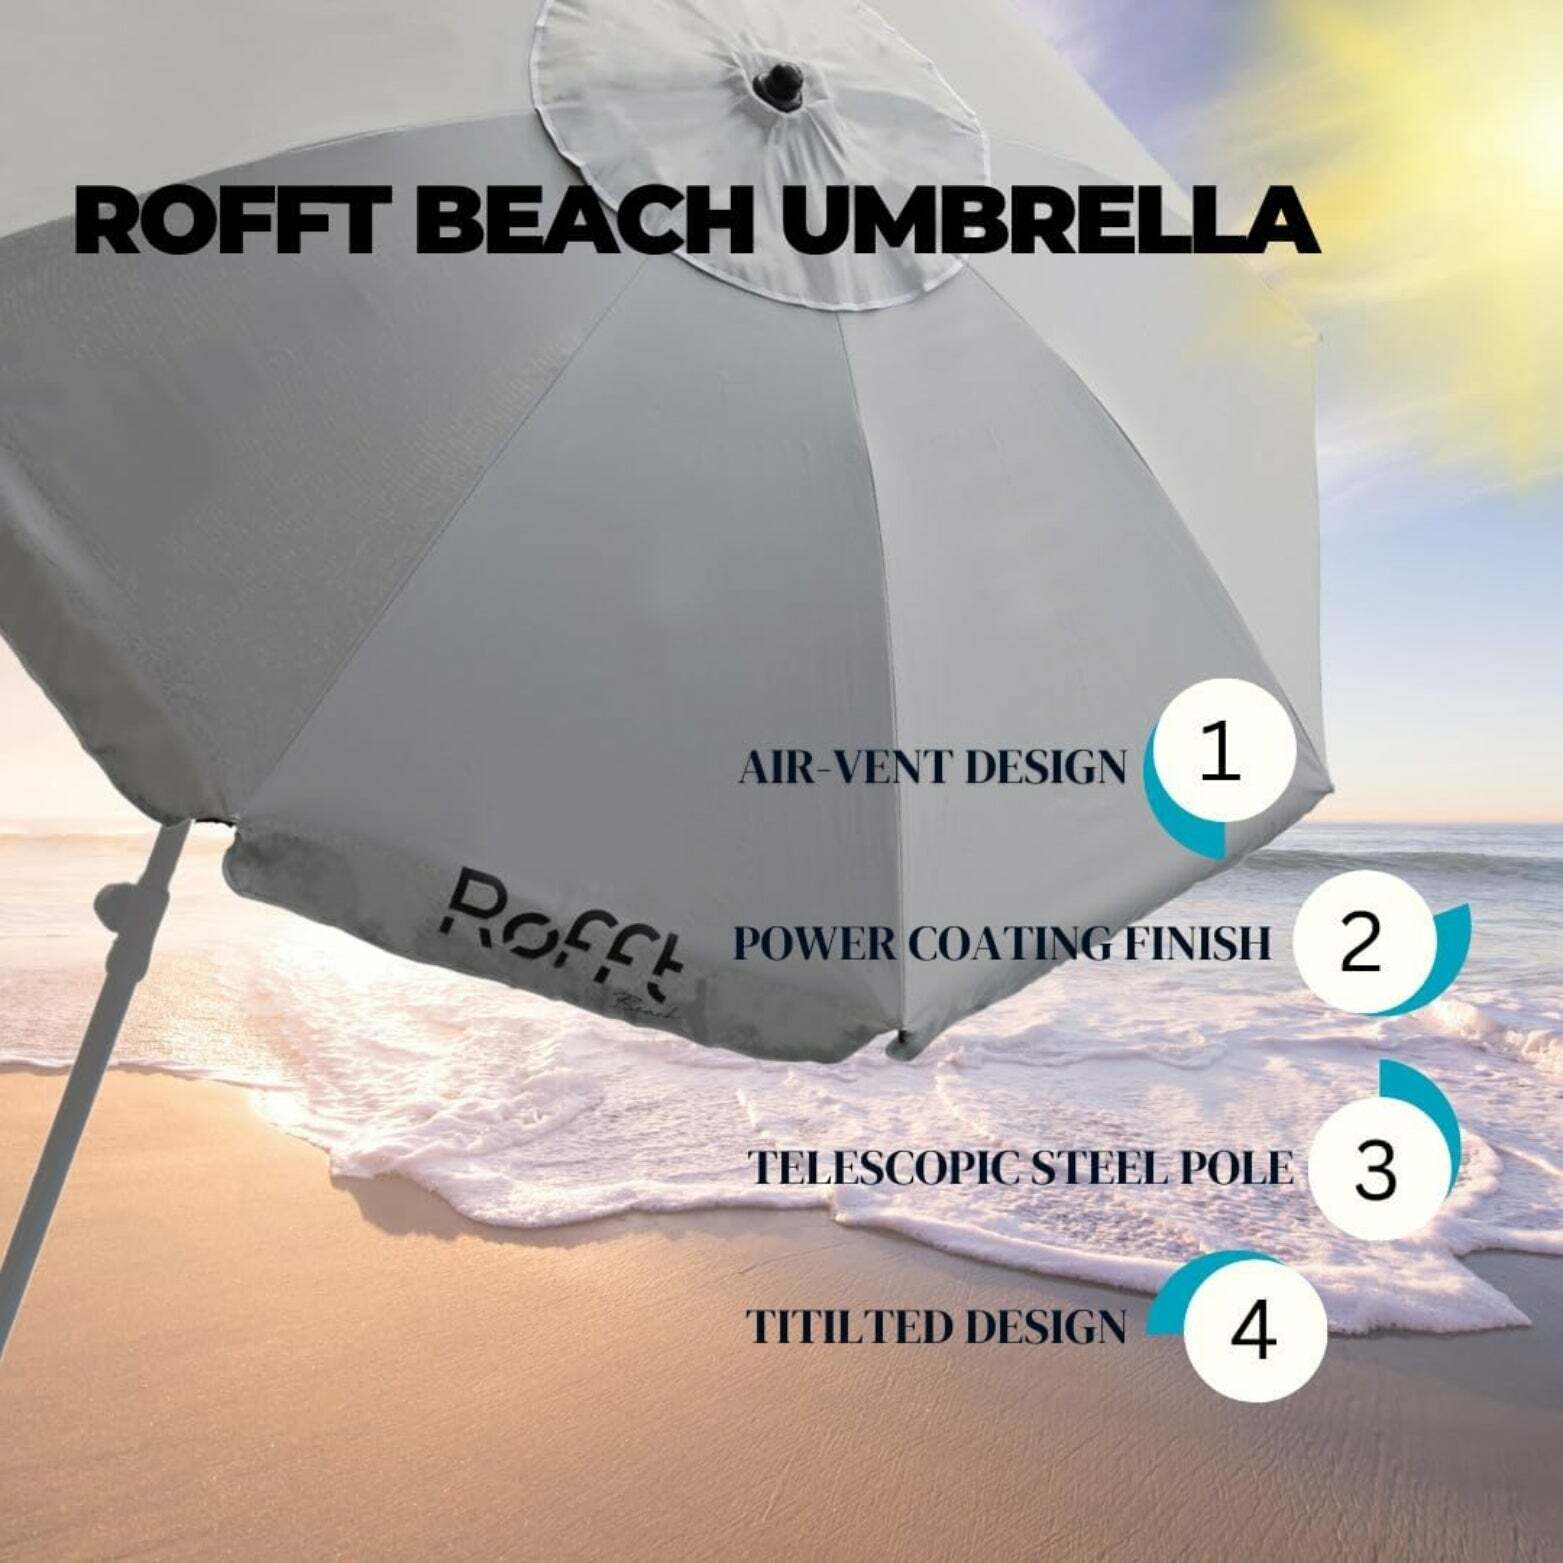 ROFFT Sturdy Beach Umbrella with UV Protection and Windproof Design - 6.5 Ft Coverage, Steel & Aluminum Pole, Tilt Adjustment- Gray